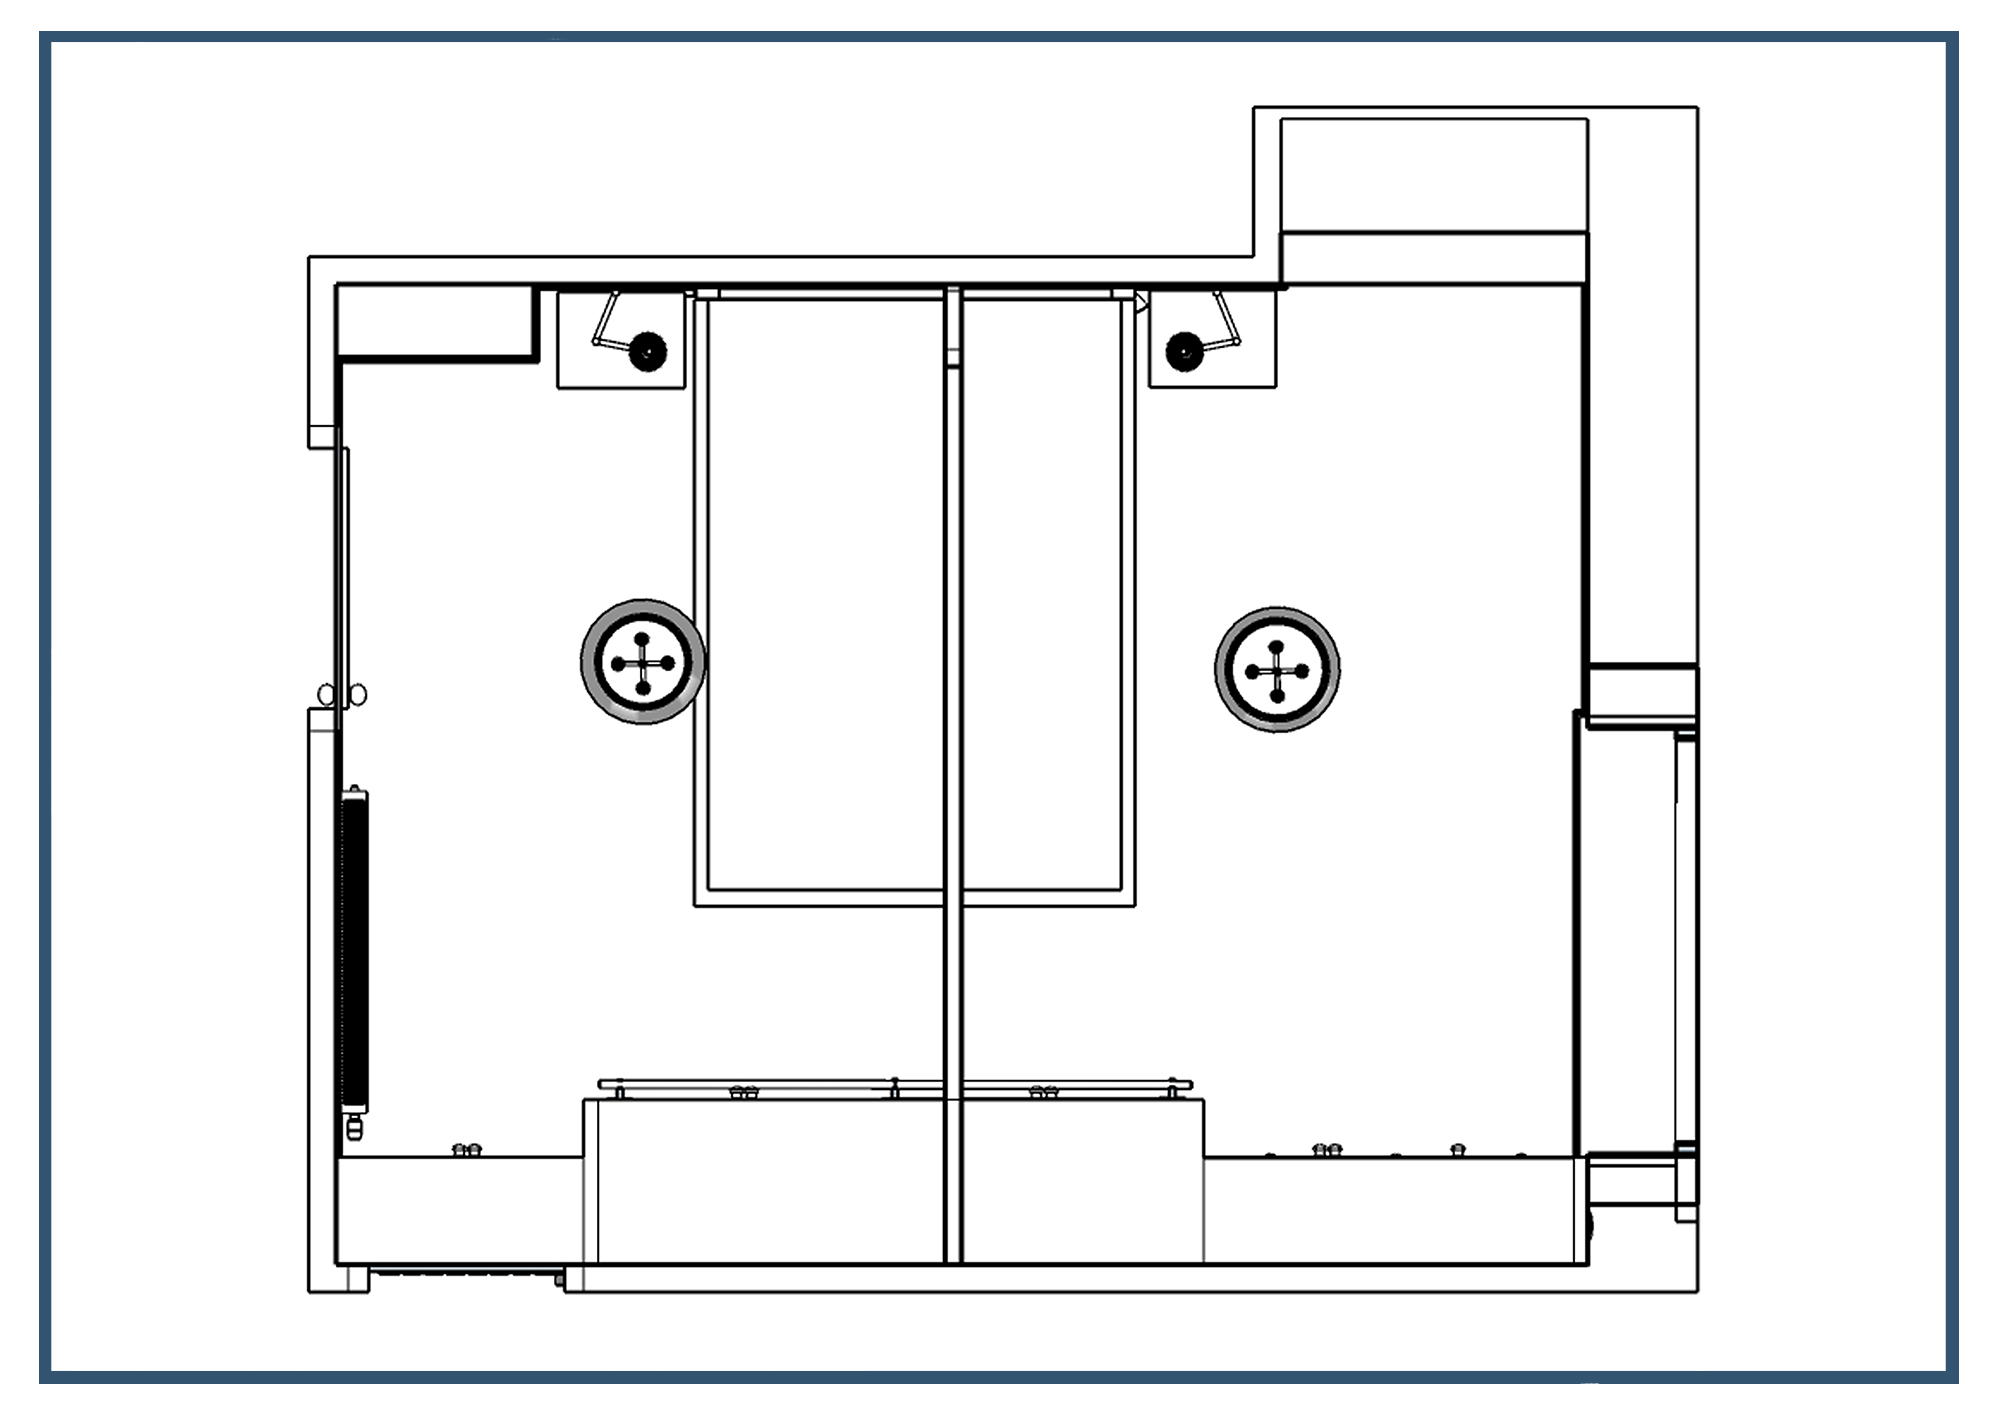 A floor layout for a bedroom